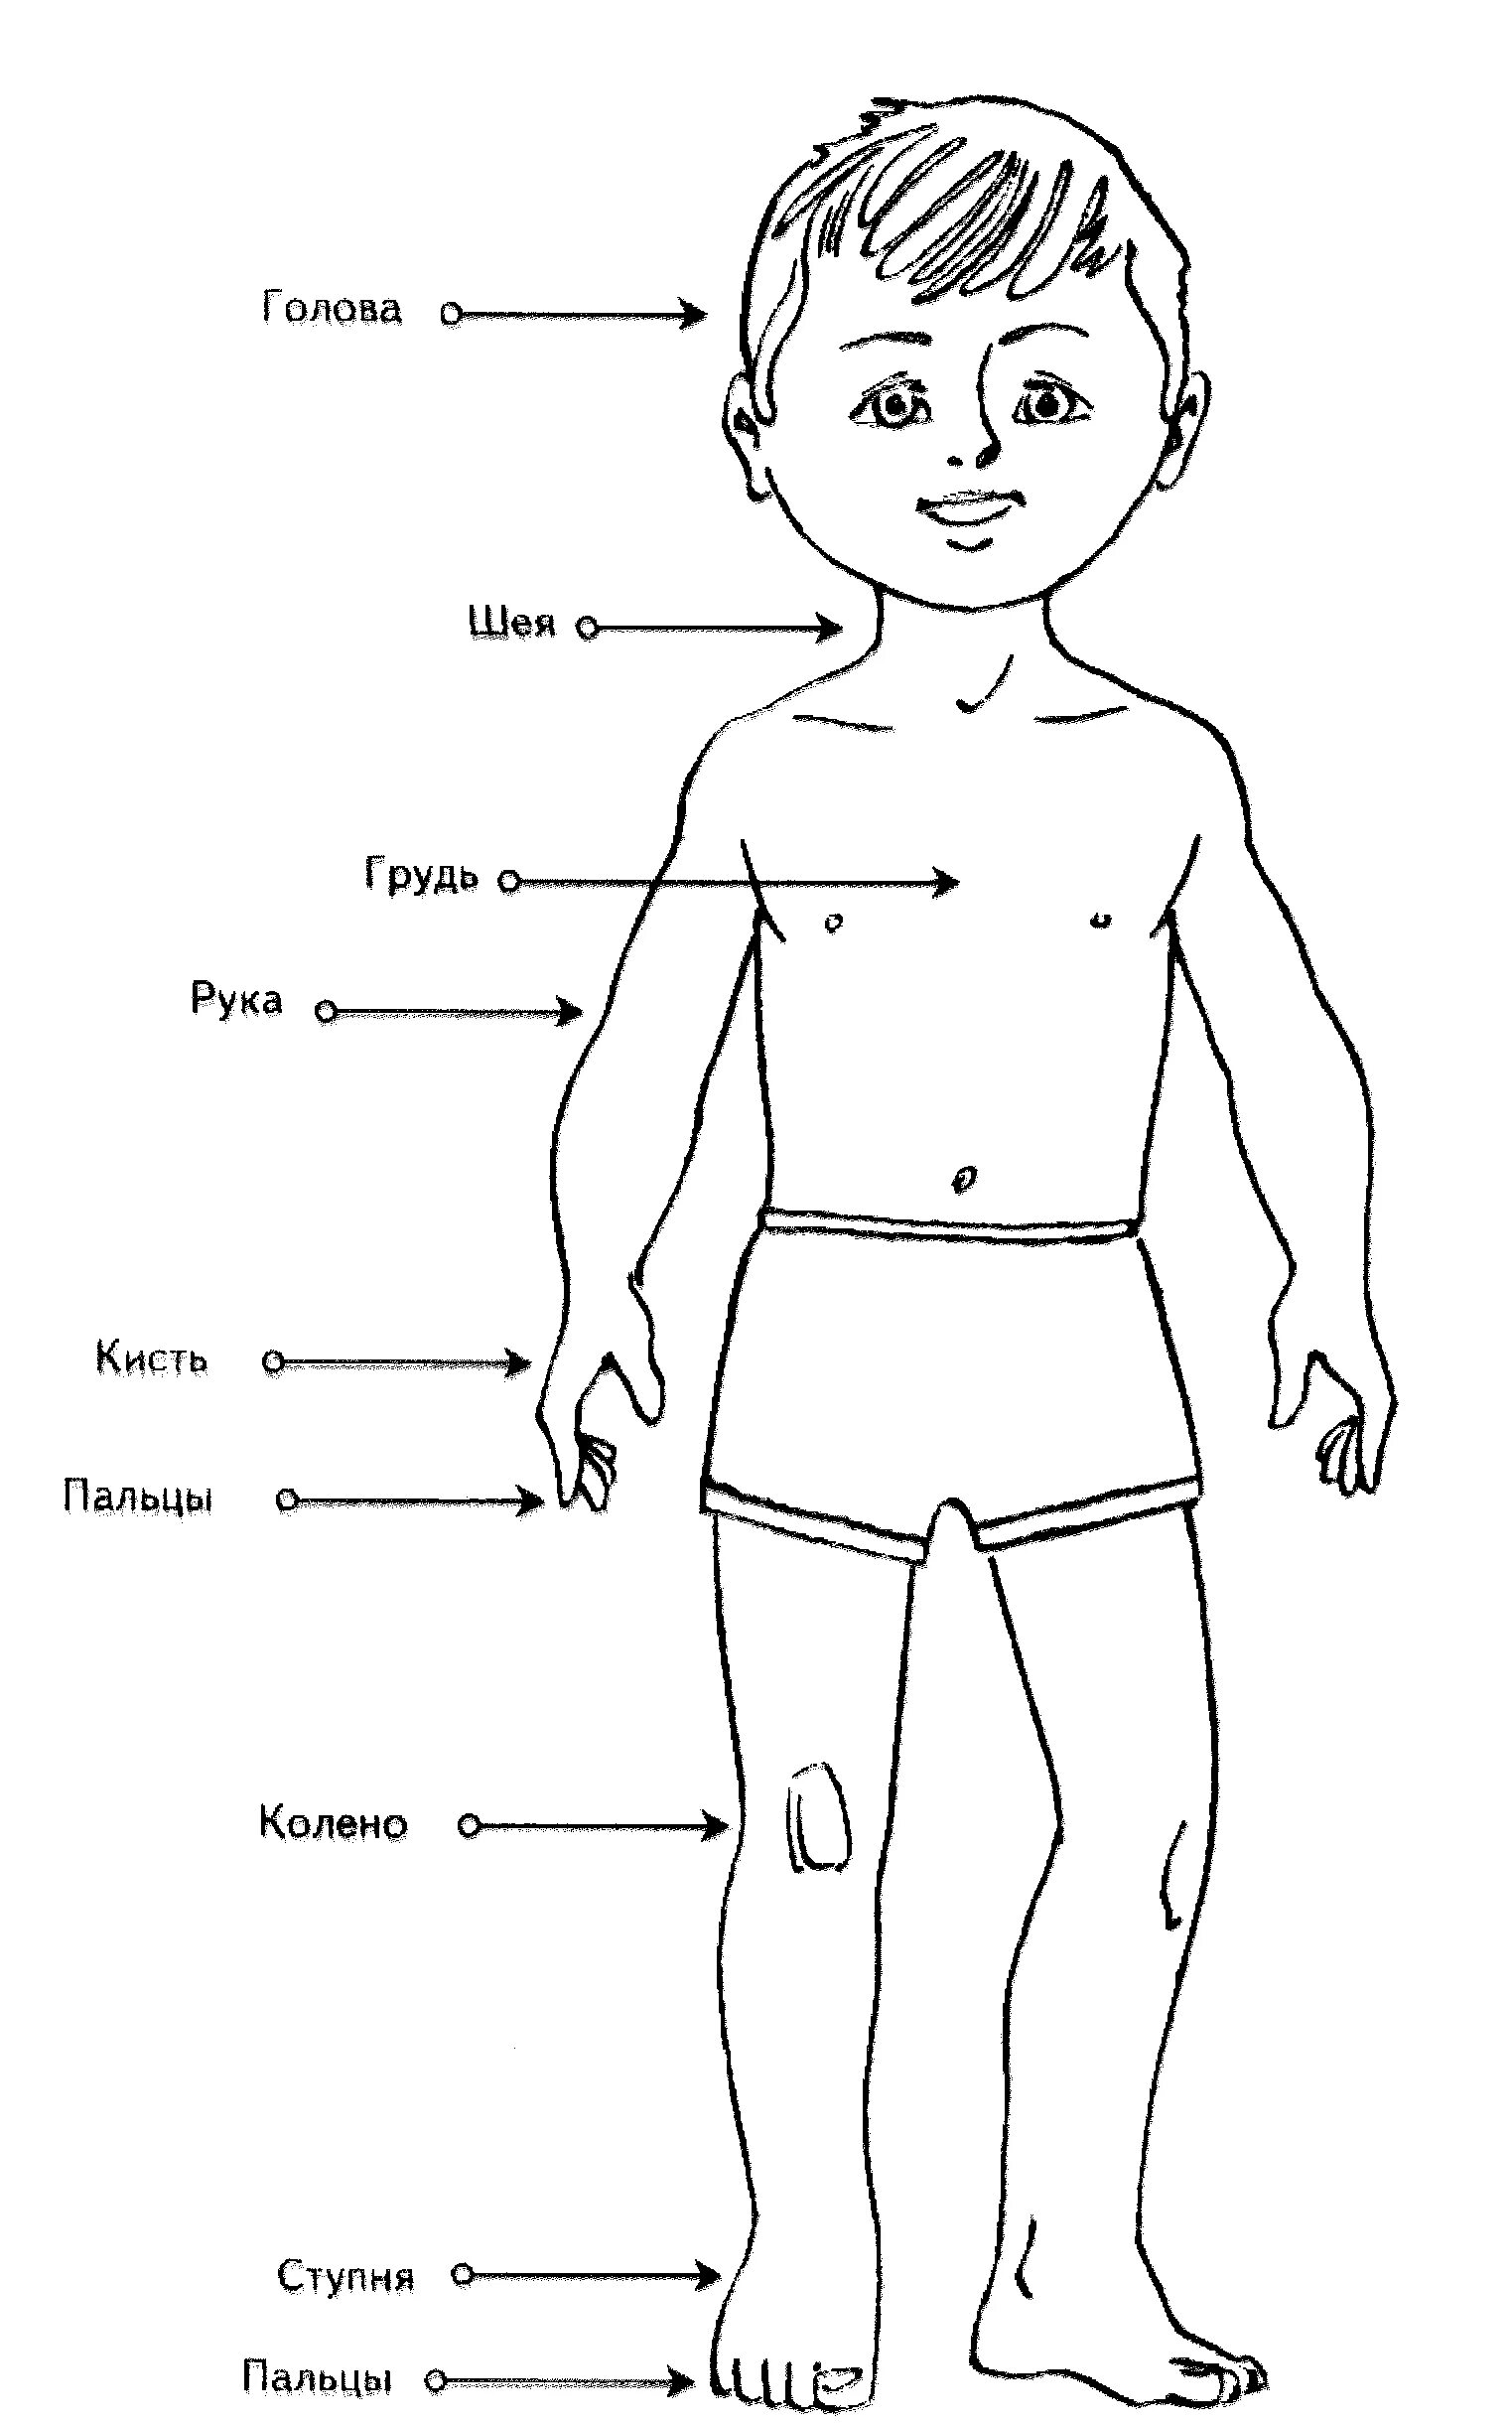 Human body structure for kids #11